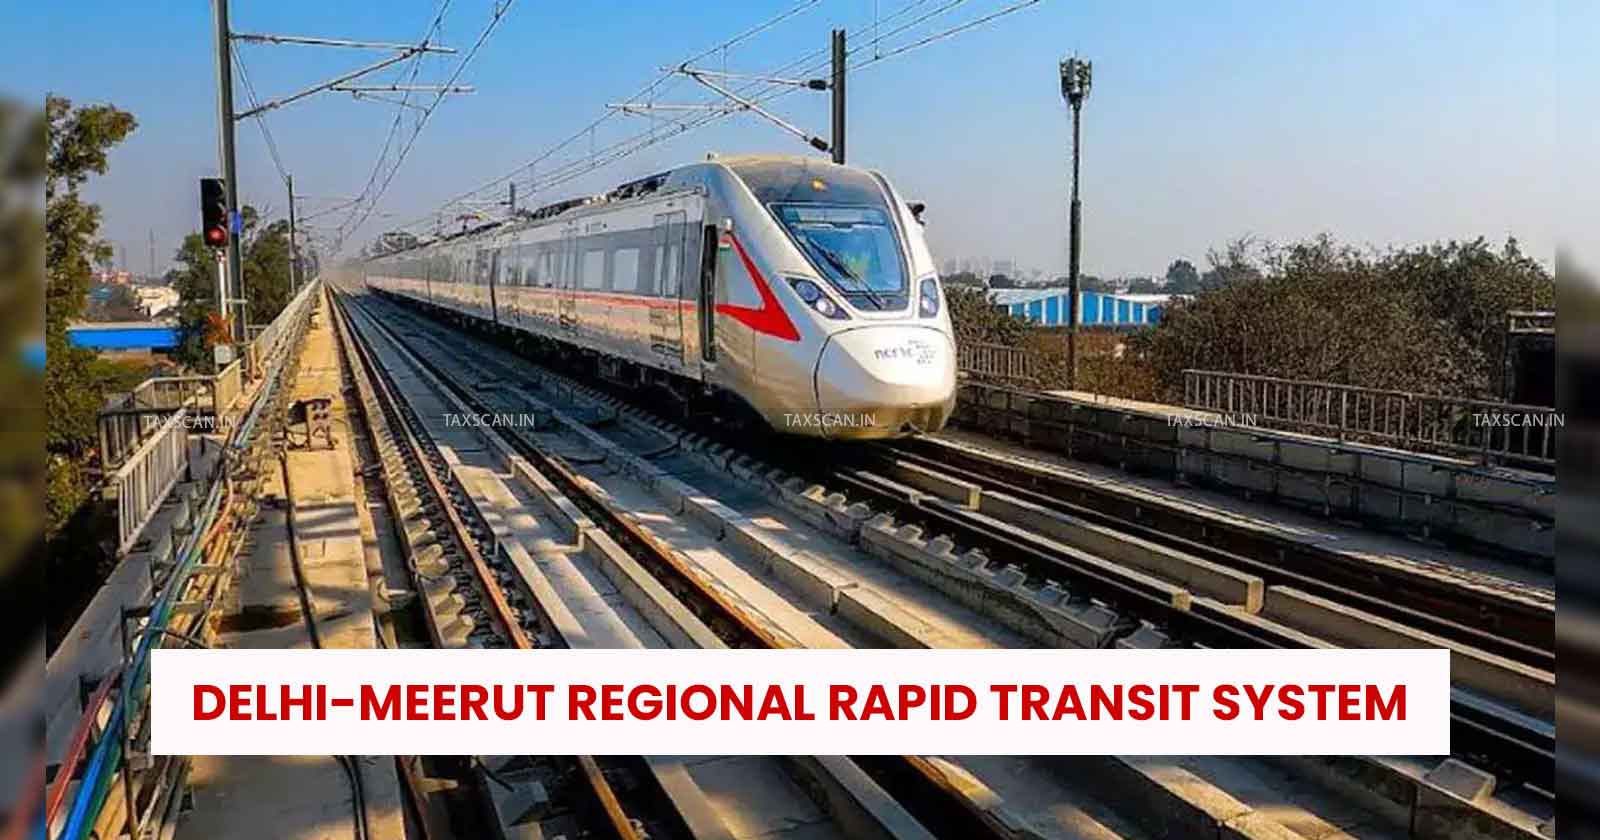 Government of India - Regional Rapid Transit System - Asian Development Bank - Government of india sign for loan - Delhi Meerut Regional Rapid Transit System - Loan agreement - taxscan